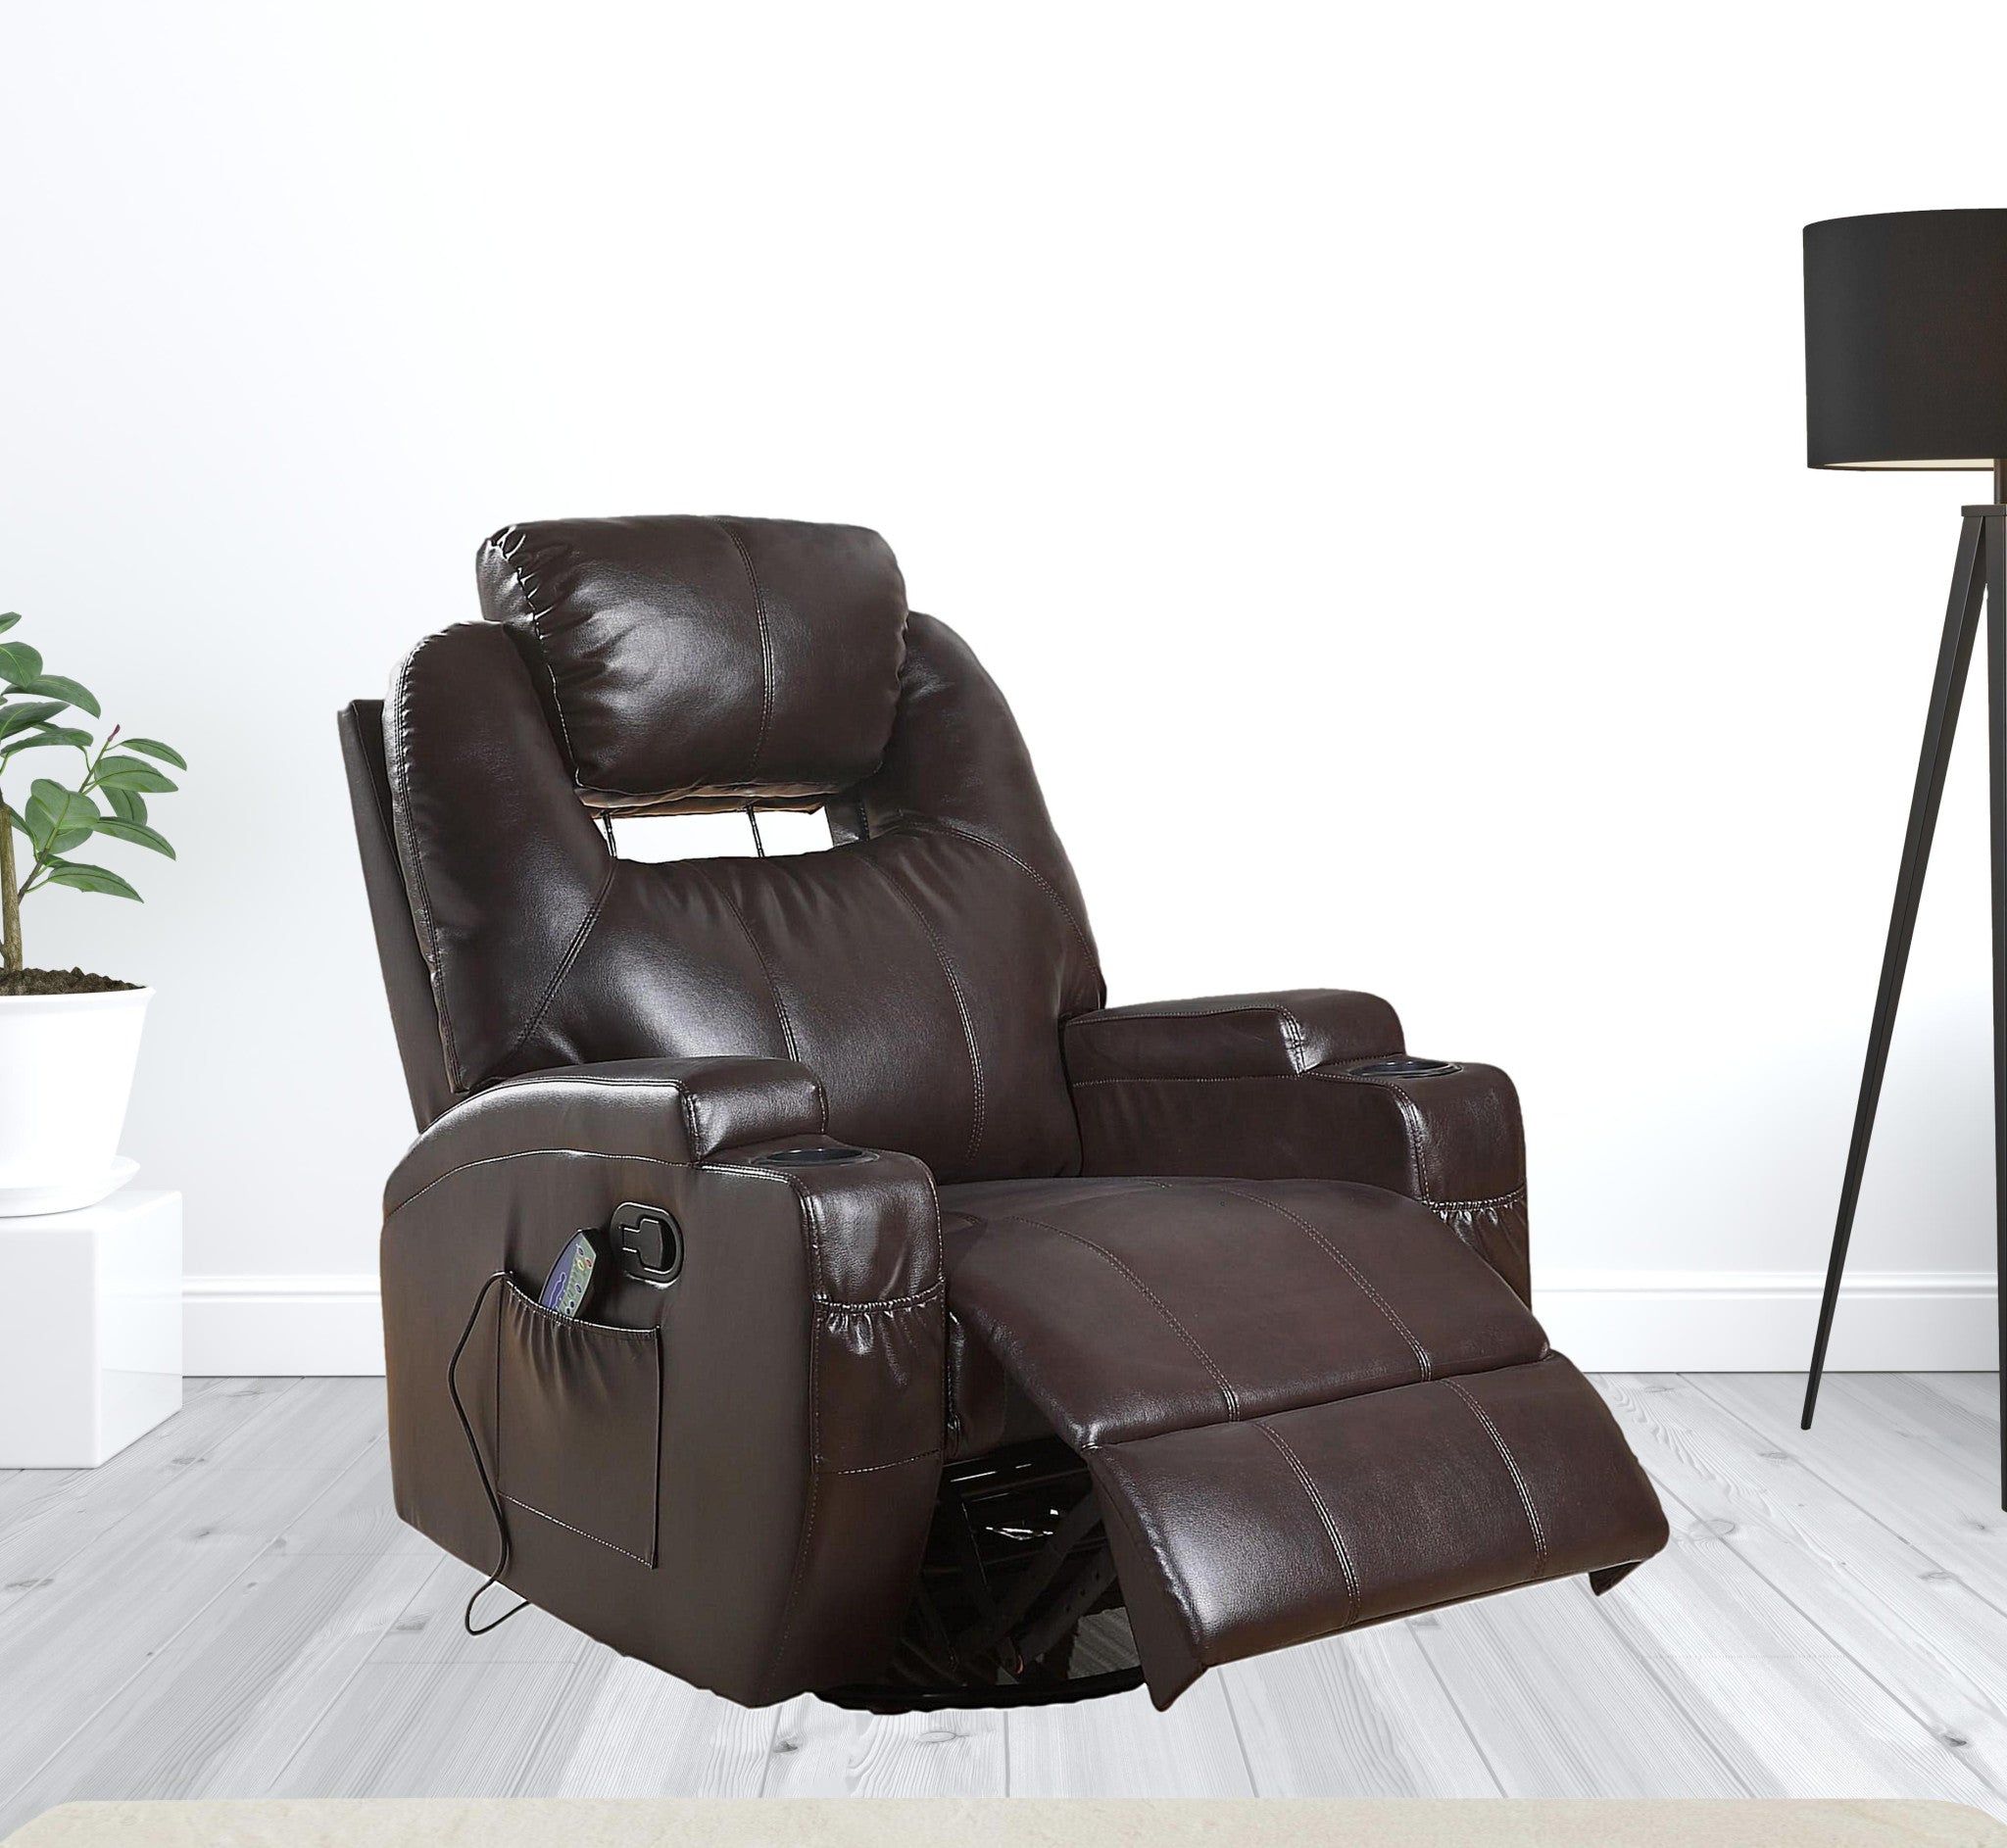 34" Brown Faux Leather Heated Massge Home Theater Recliner